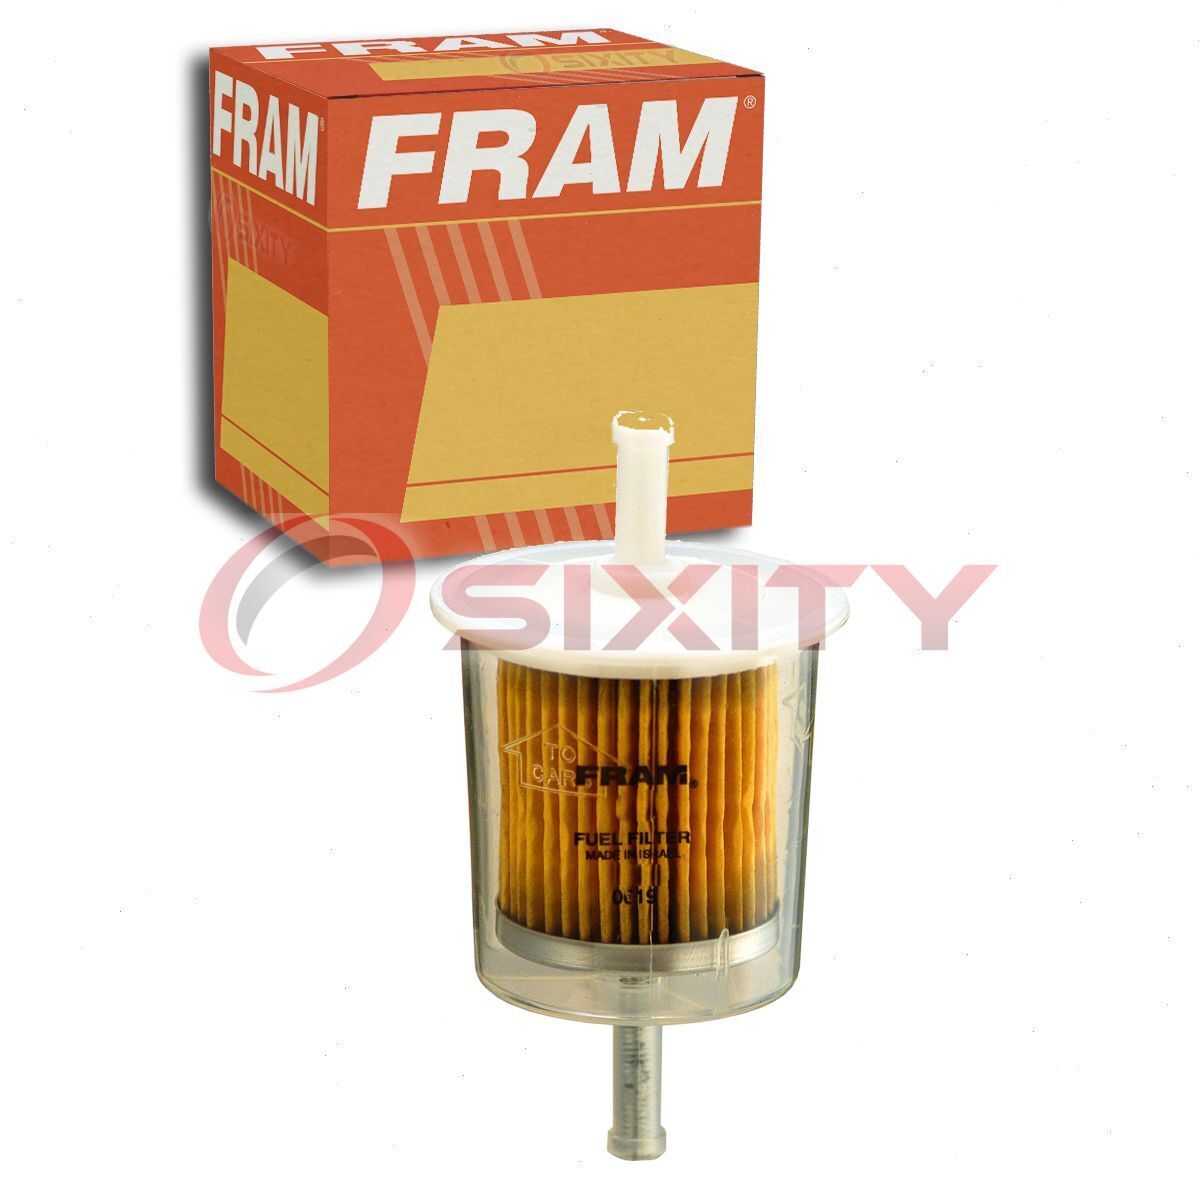 FRAM Fuel Filter for 1959-1968 Ford Anglia Gas Pump Line Air Delivery xt